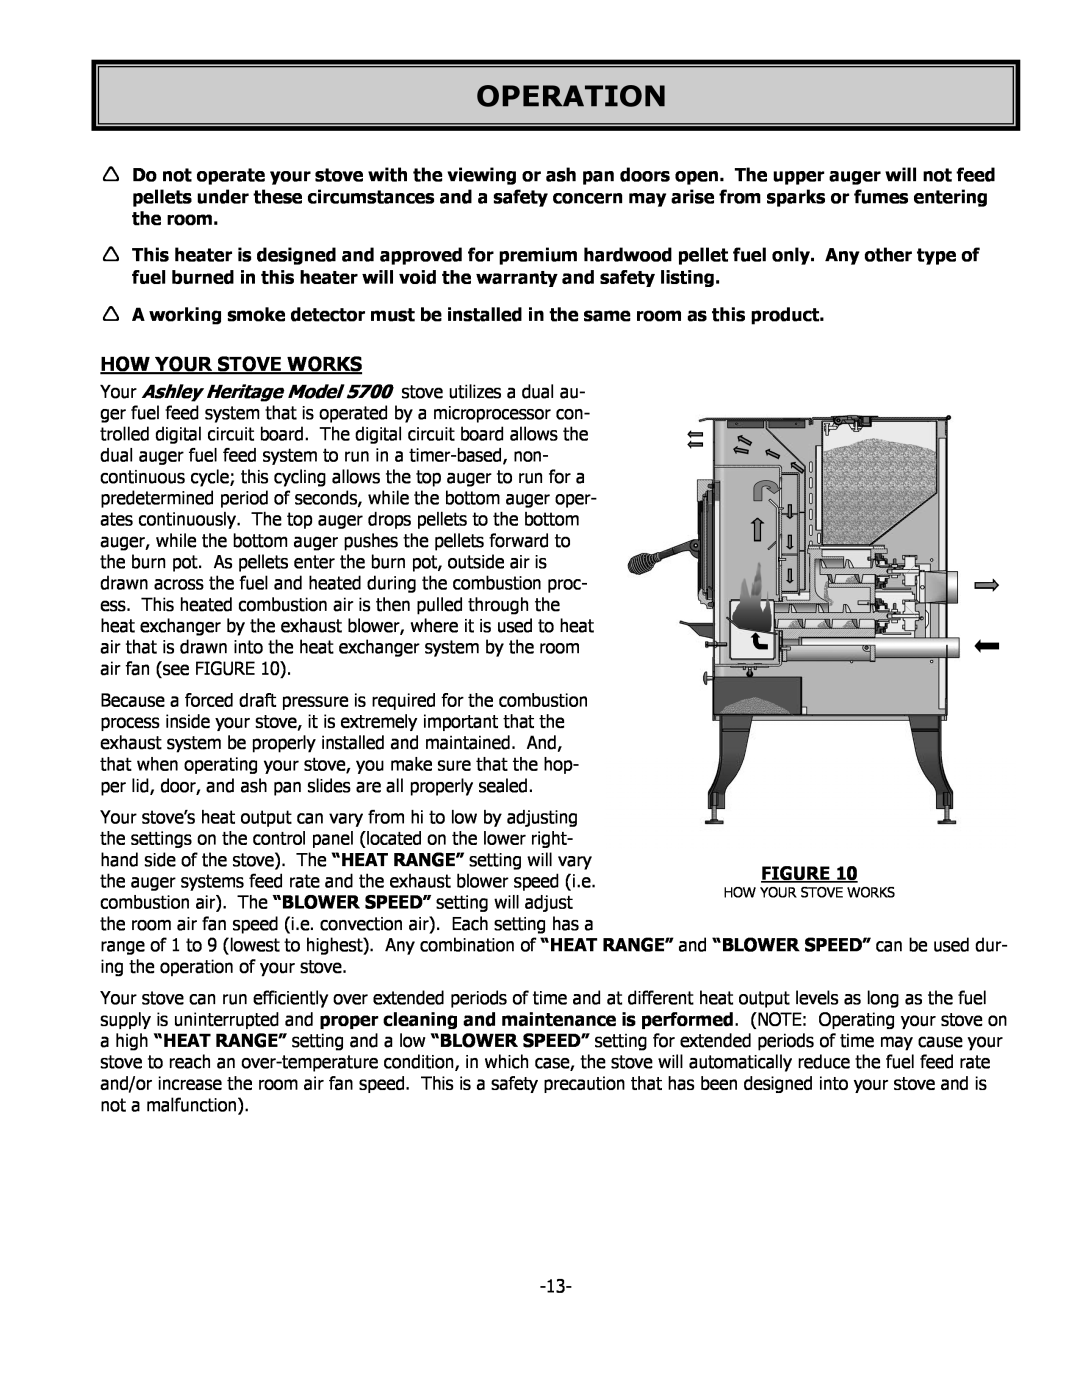 United States Stove 5700 owner manual Operation, How Your Stove Works 